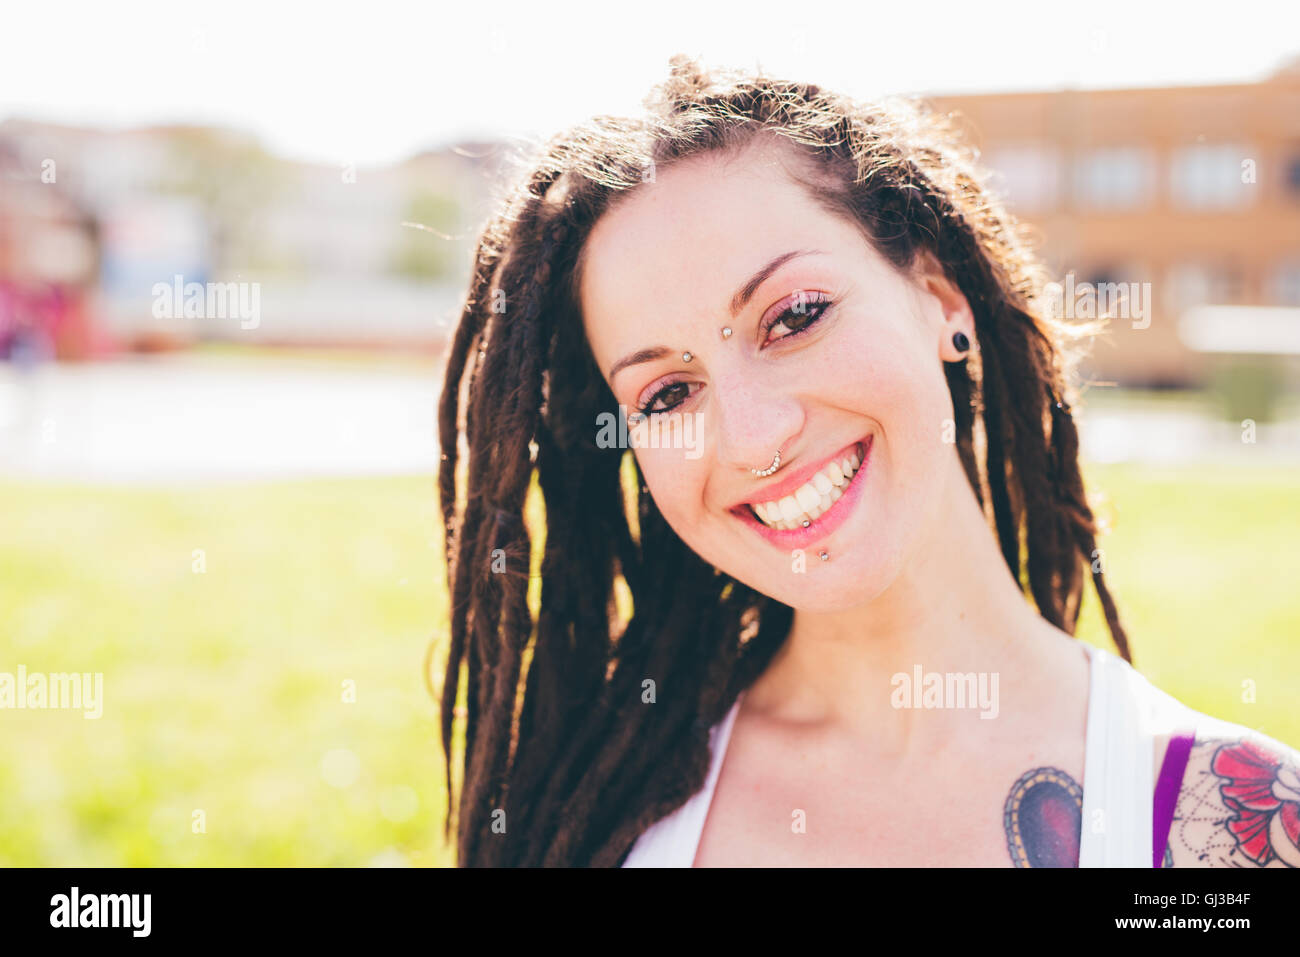 Portrait of tattooed young woman with dreadlocks in urban park Stock Photo